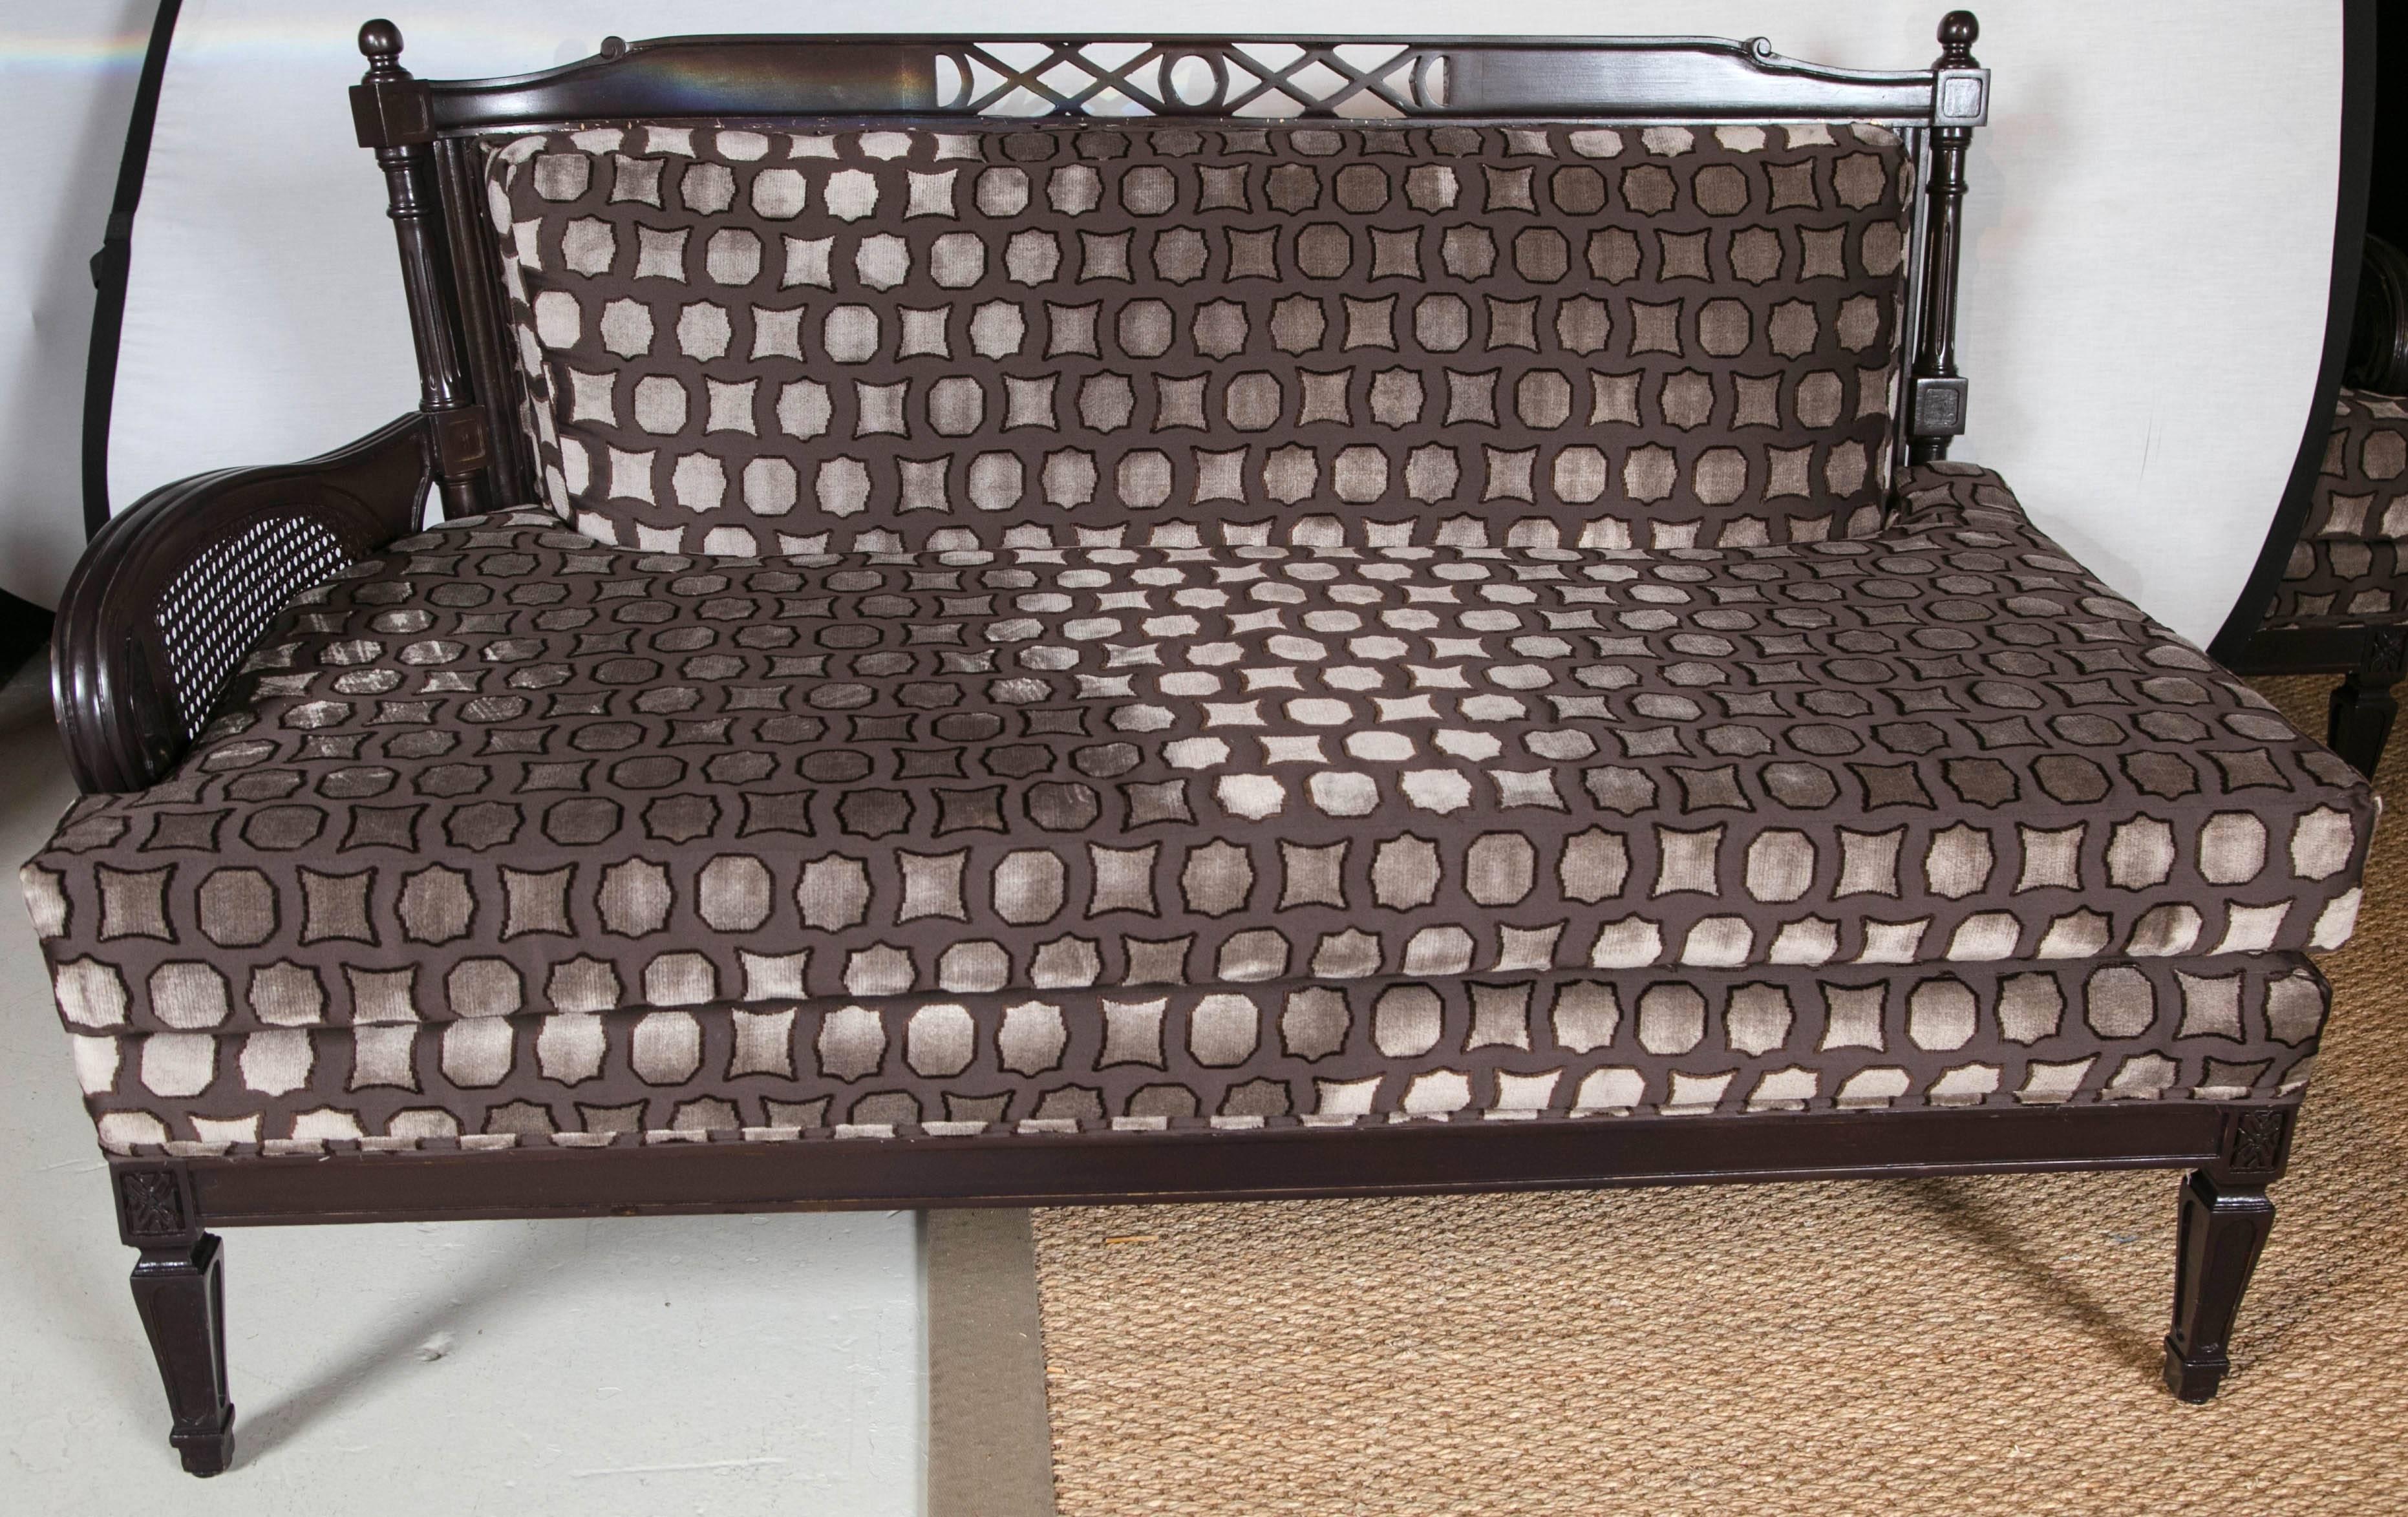 Pair of exquisitely upholstered loveseats from Italy. Espresso brown print fabric from Dedar of Milano.